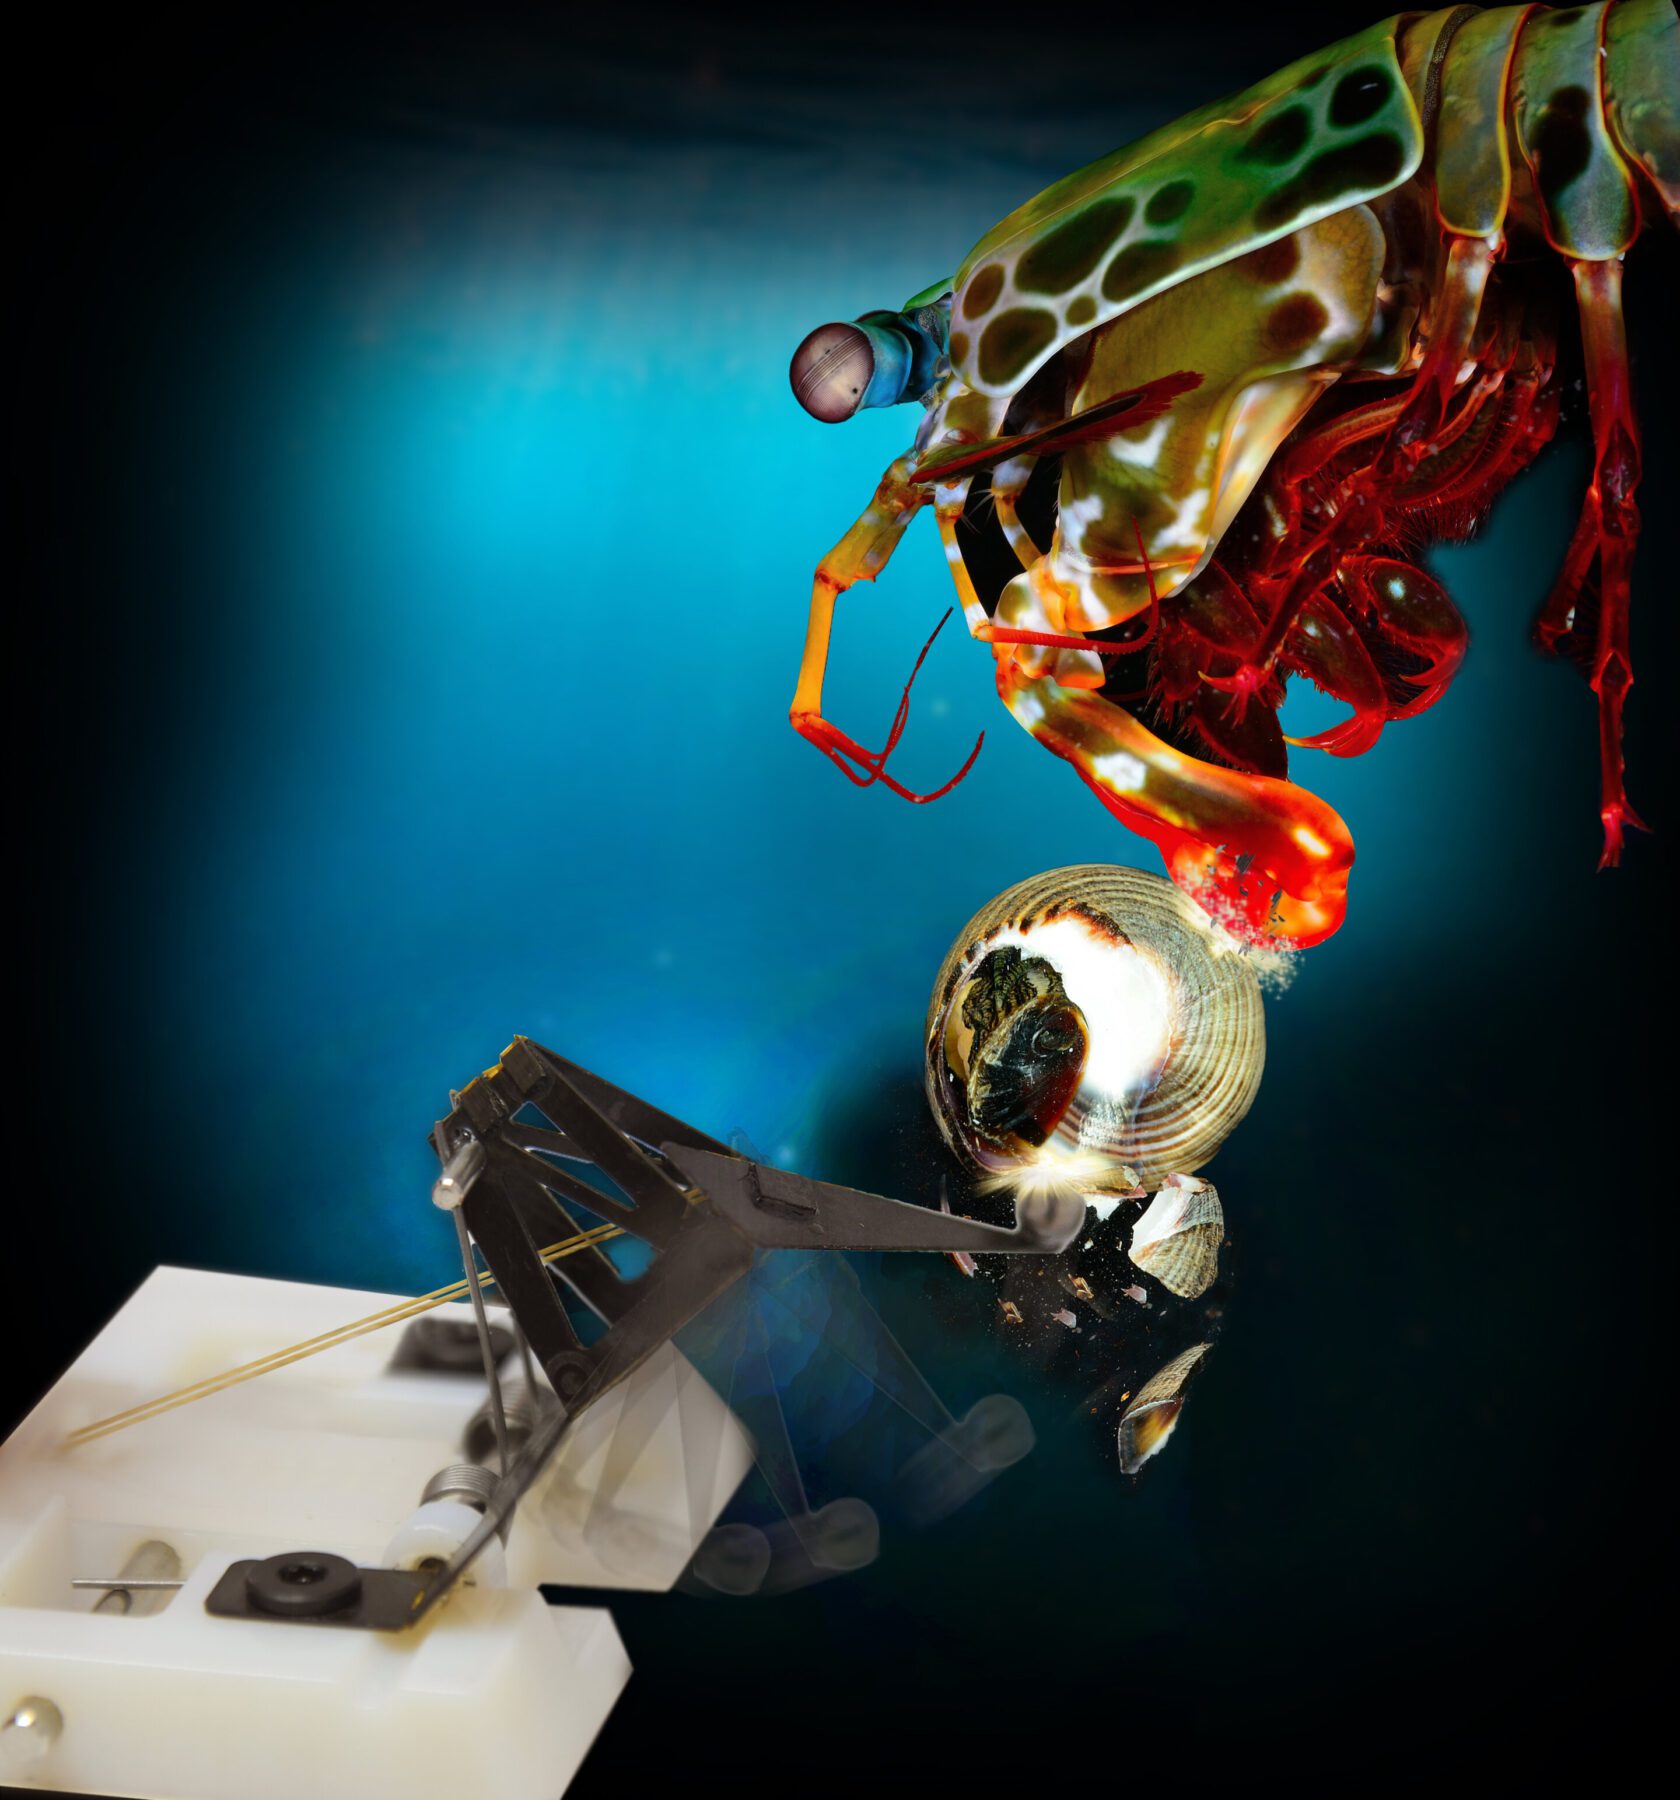 An interdisciplinary team of roboticists, engineers and biologists modeled the mechanics of the mantis shrimp’s punch and built a robot that mimics the movement. (Credit: Second Bay Studios and Roy Caldwell/Harvard SEAS)